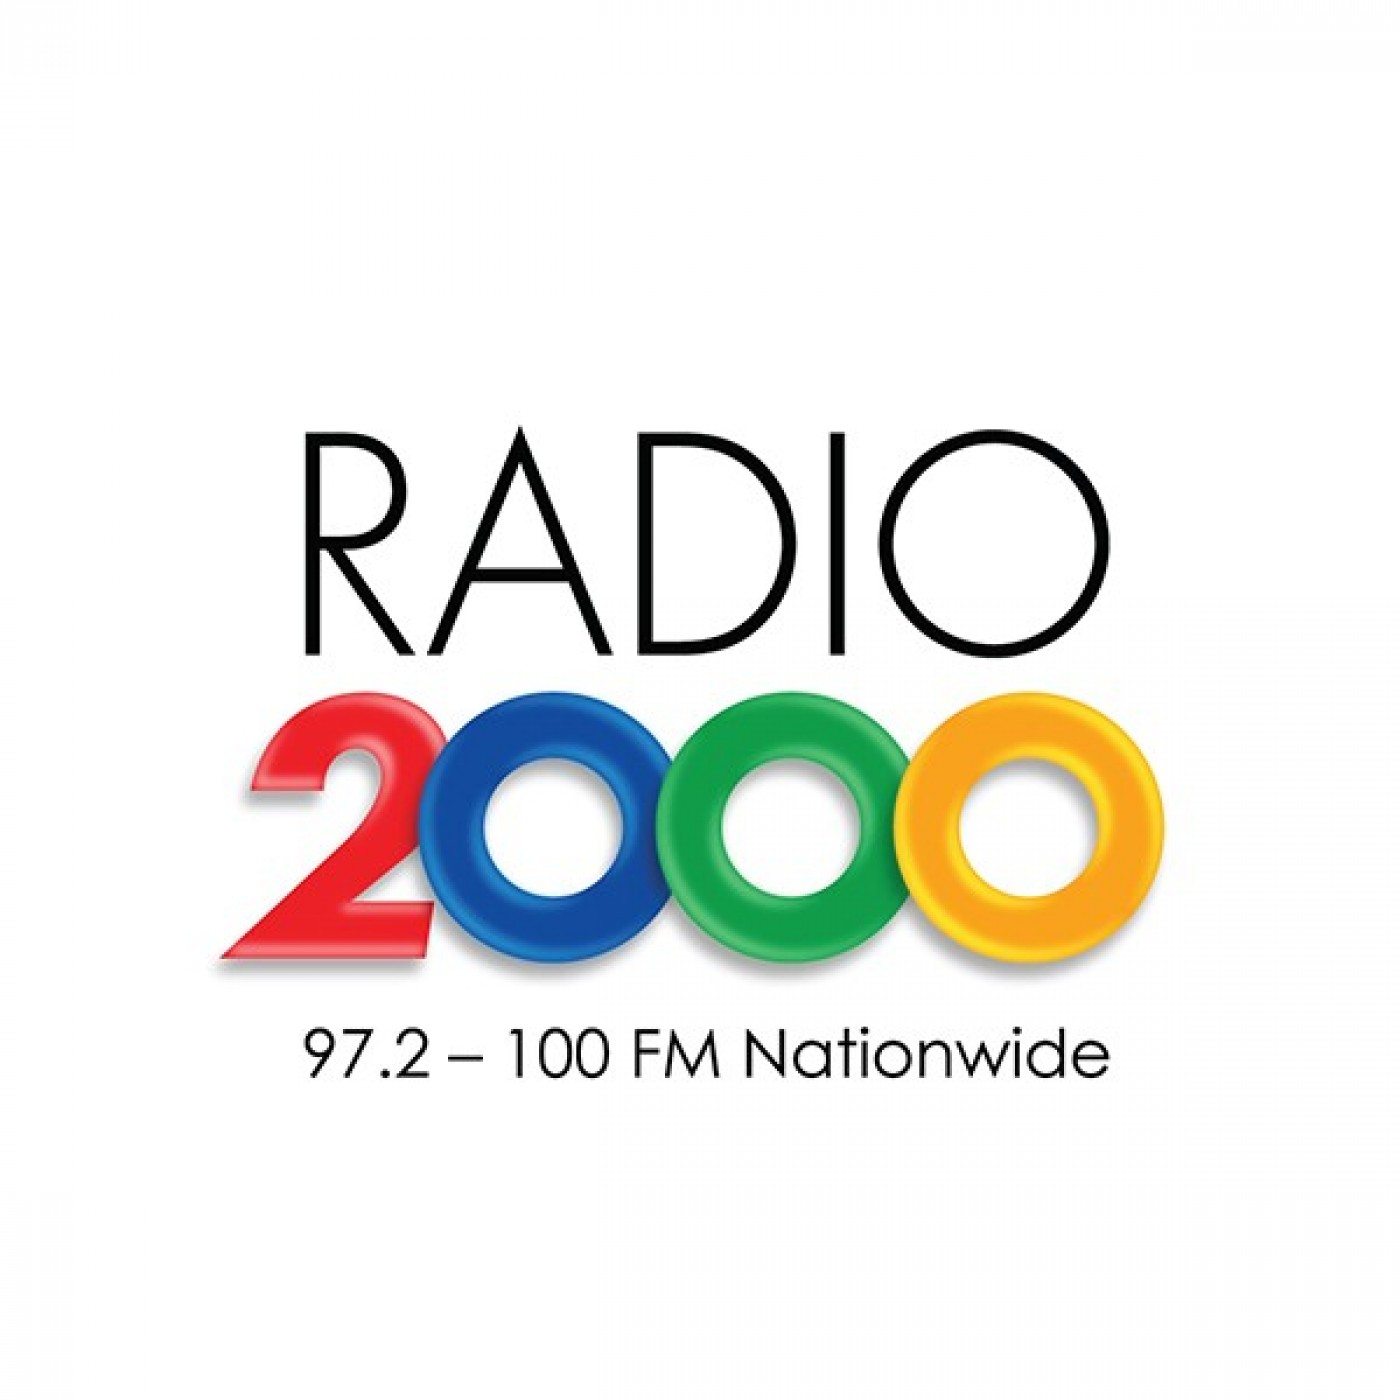 RADIO 2000 IN THE MIX AFRO-TECH MIXED DY DARK HORSE SA 24-04-2020 22H20-22H40